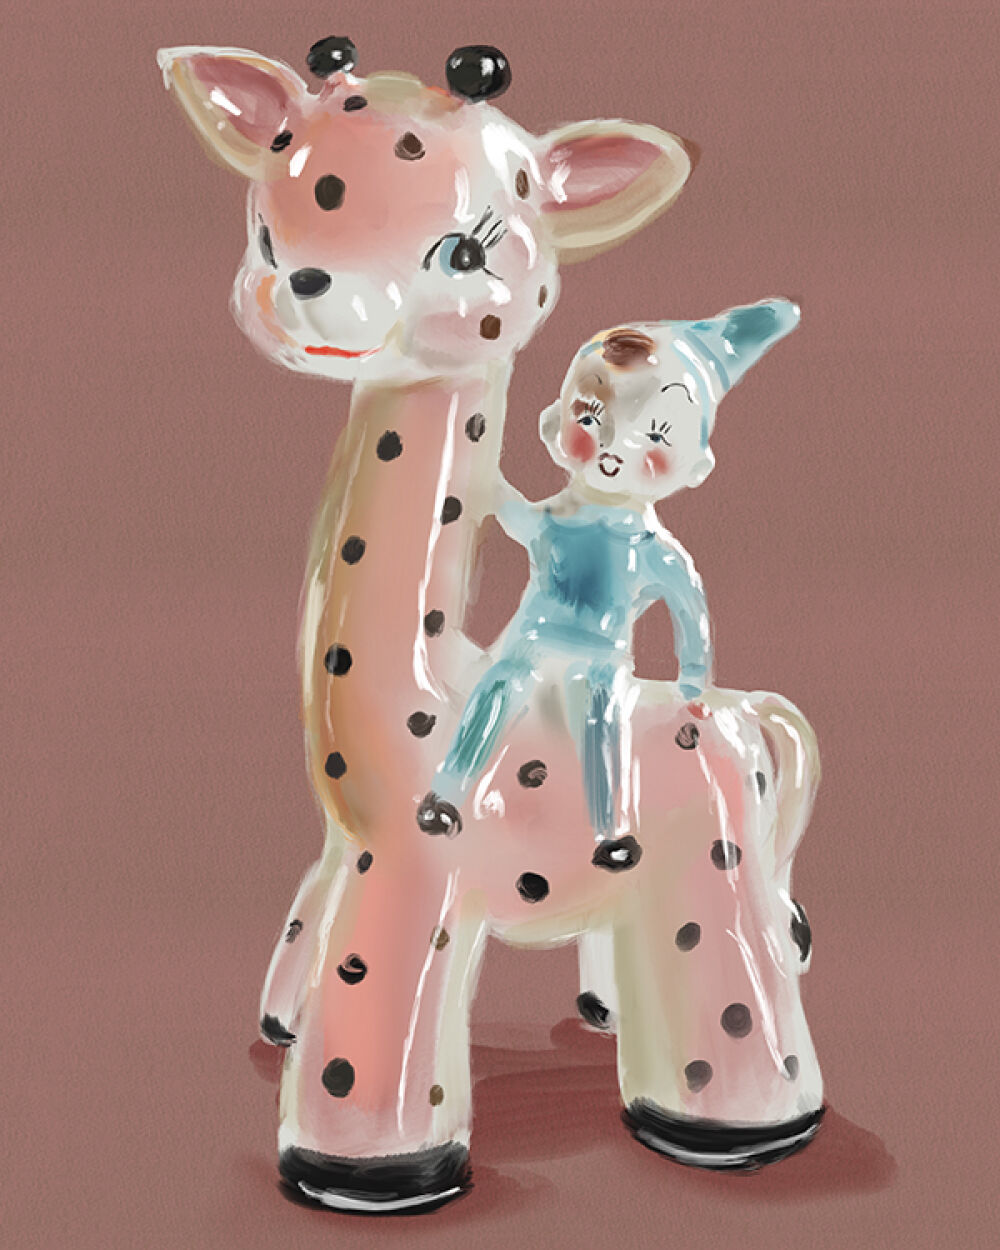 Cute Toy illustration and packaging illustration by Christina Gliha